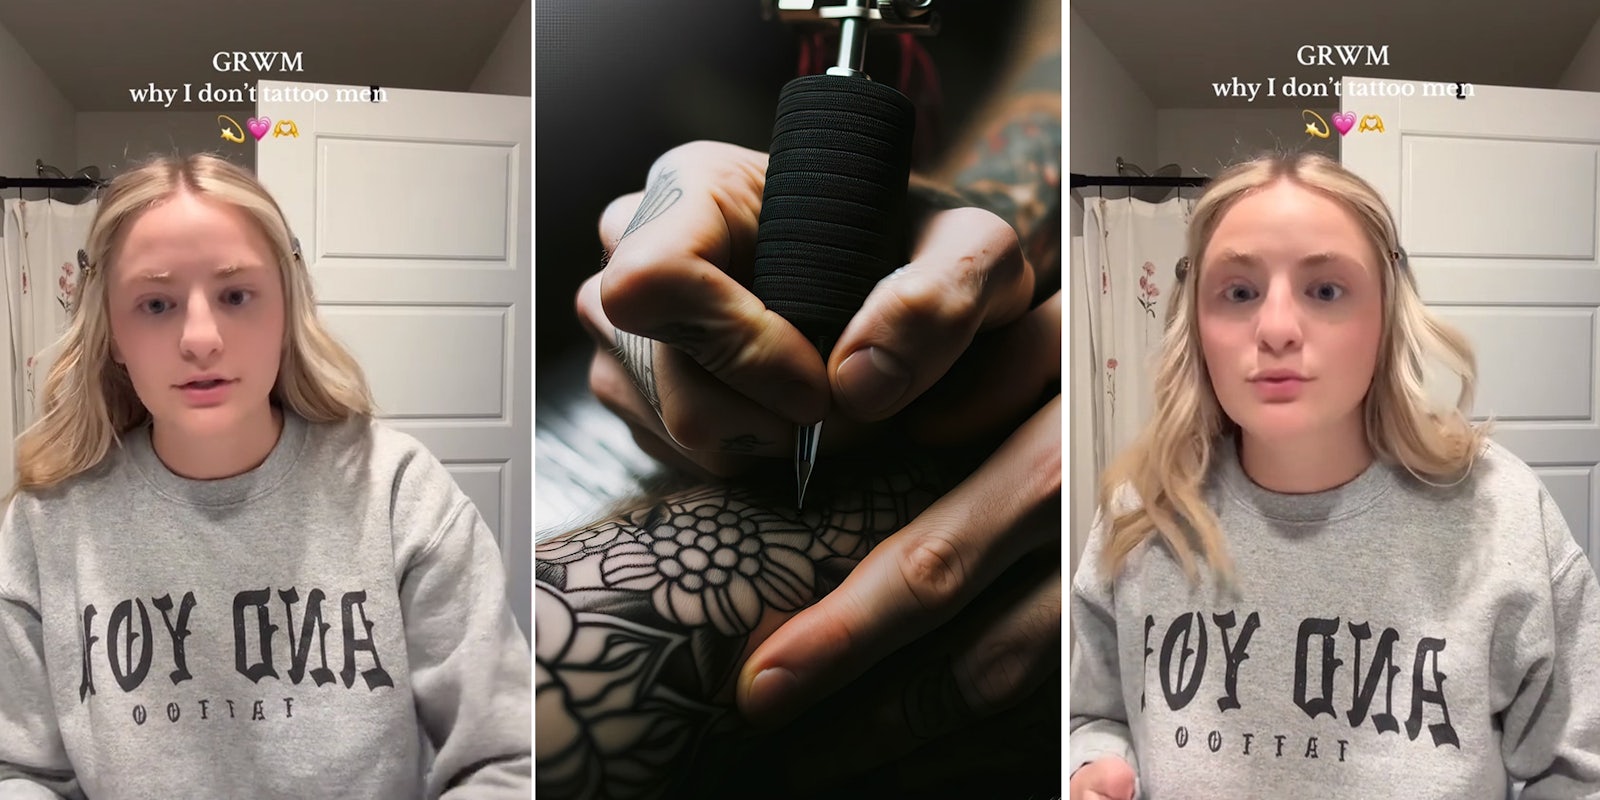 Tattoo artist says she will no longer take male clients